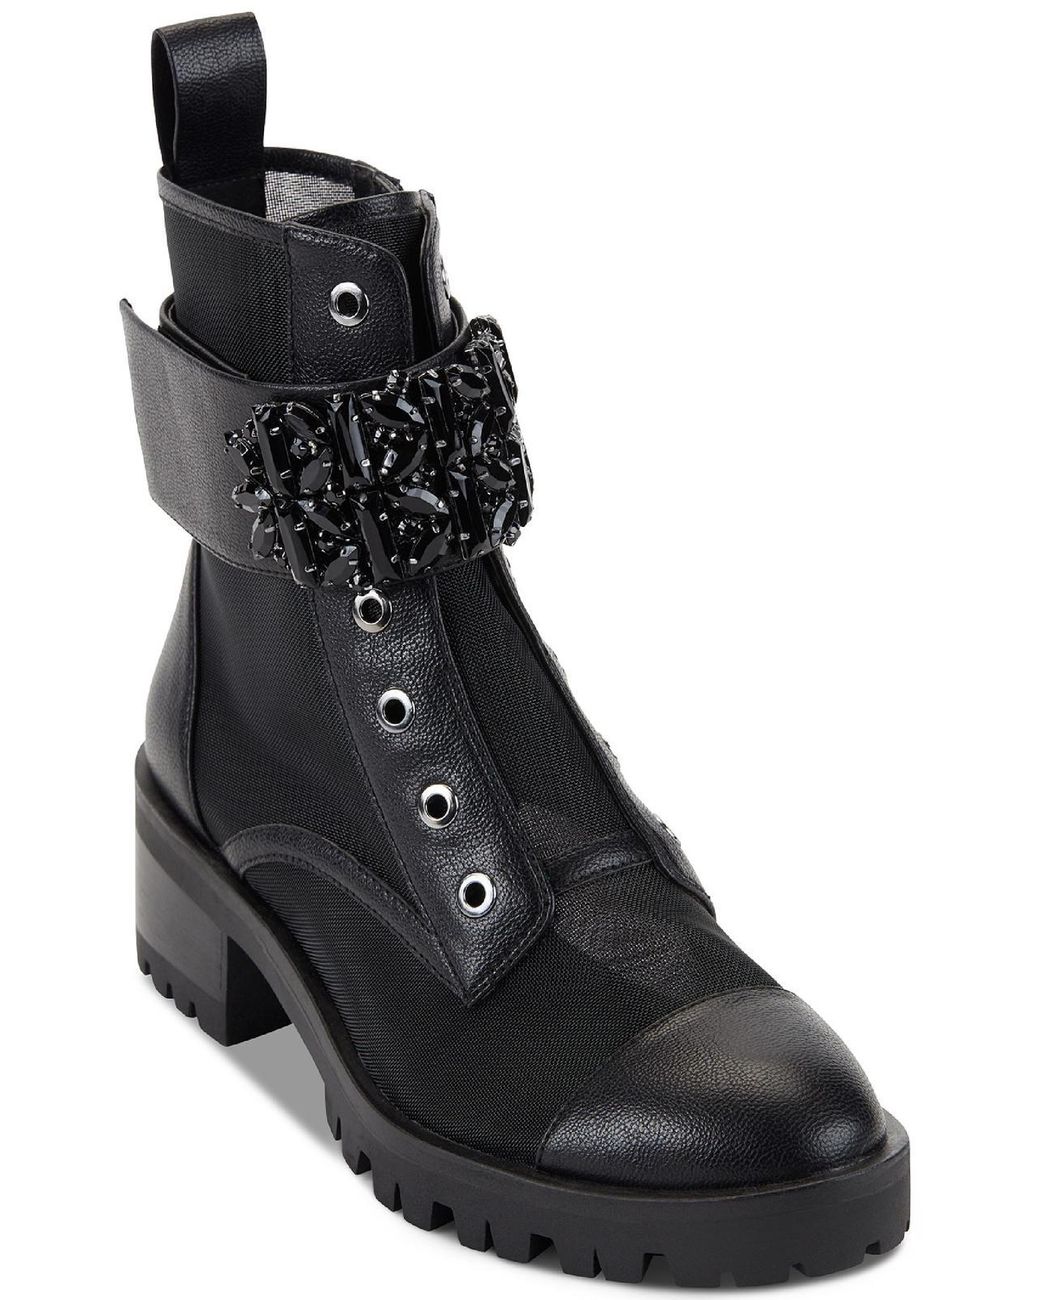 Karl Lagerfeld Pippa Lugged Sole Zipper Ankle Boots in Black | Lyst